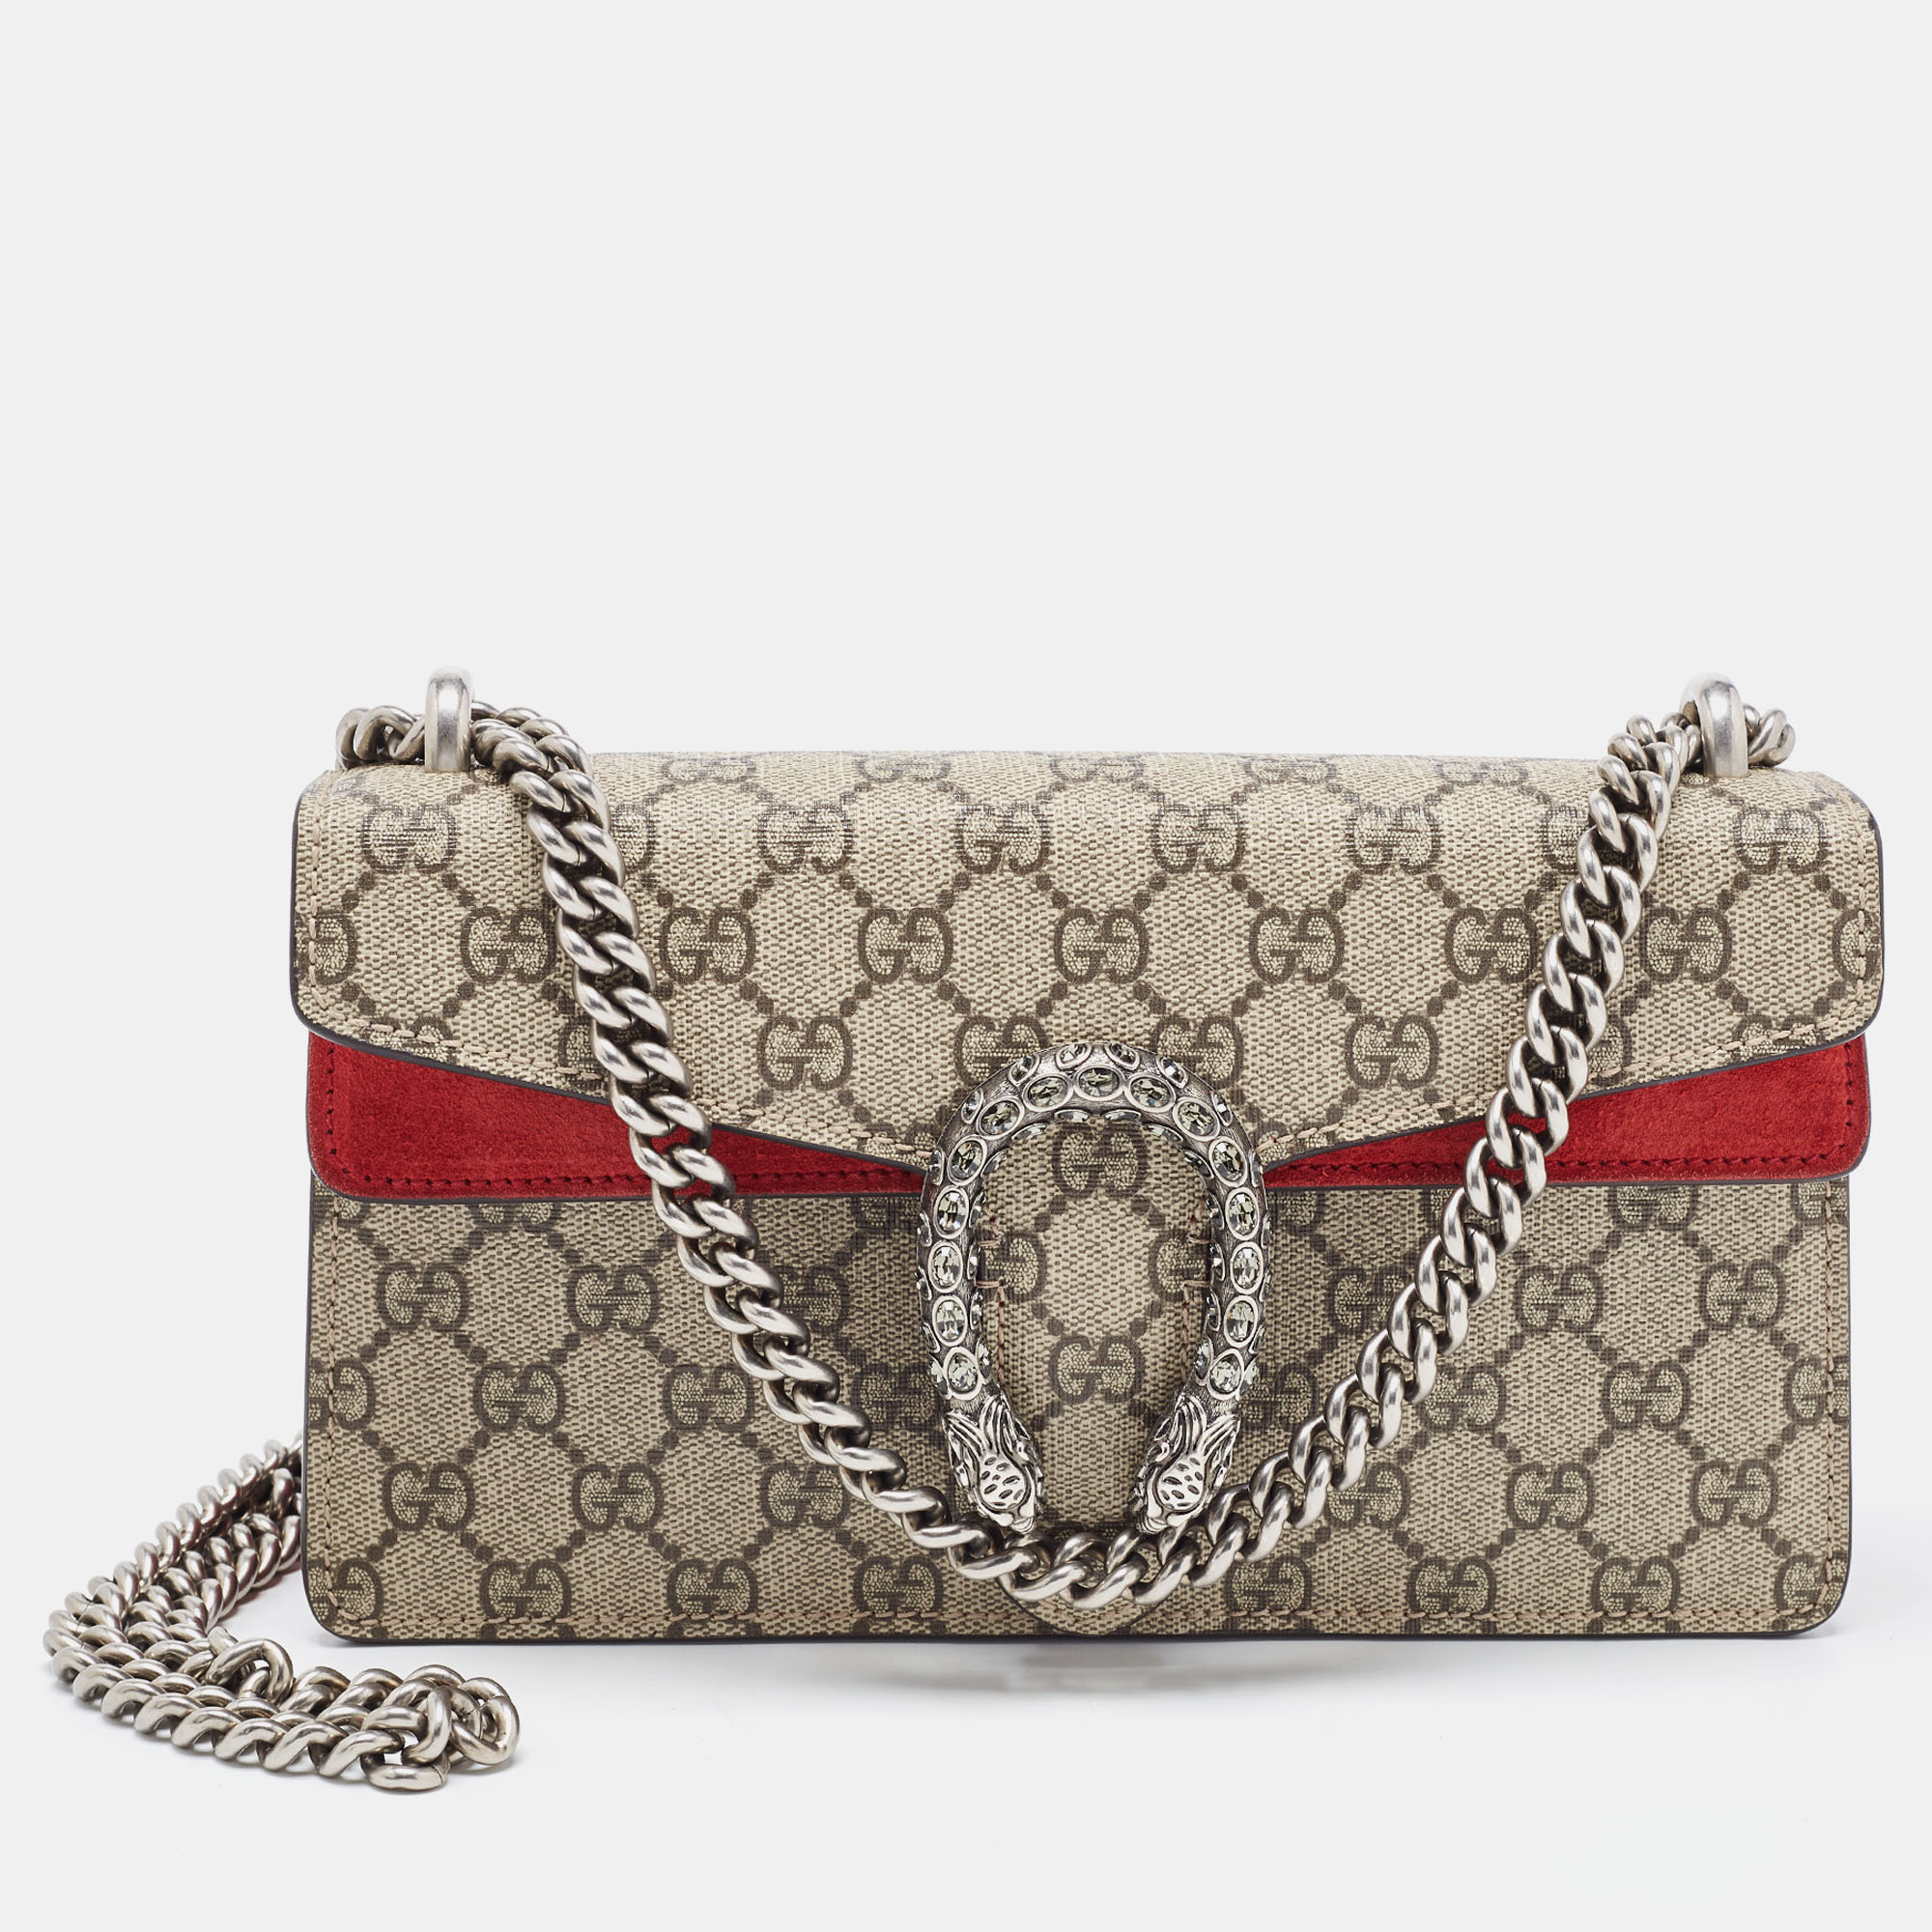 Gucci Beige/Red GG Supreme Canvas And Suede Small Rectangular Dionysus Shoulder Bag